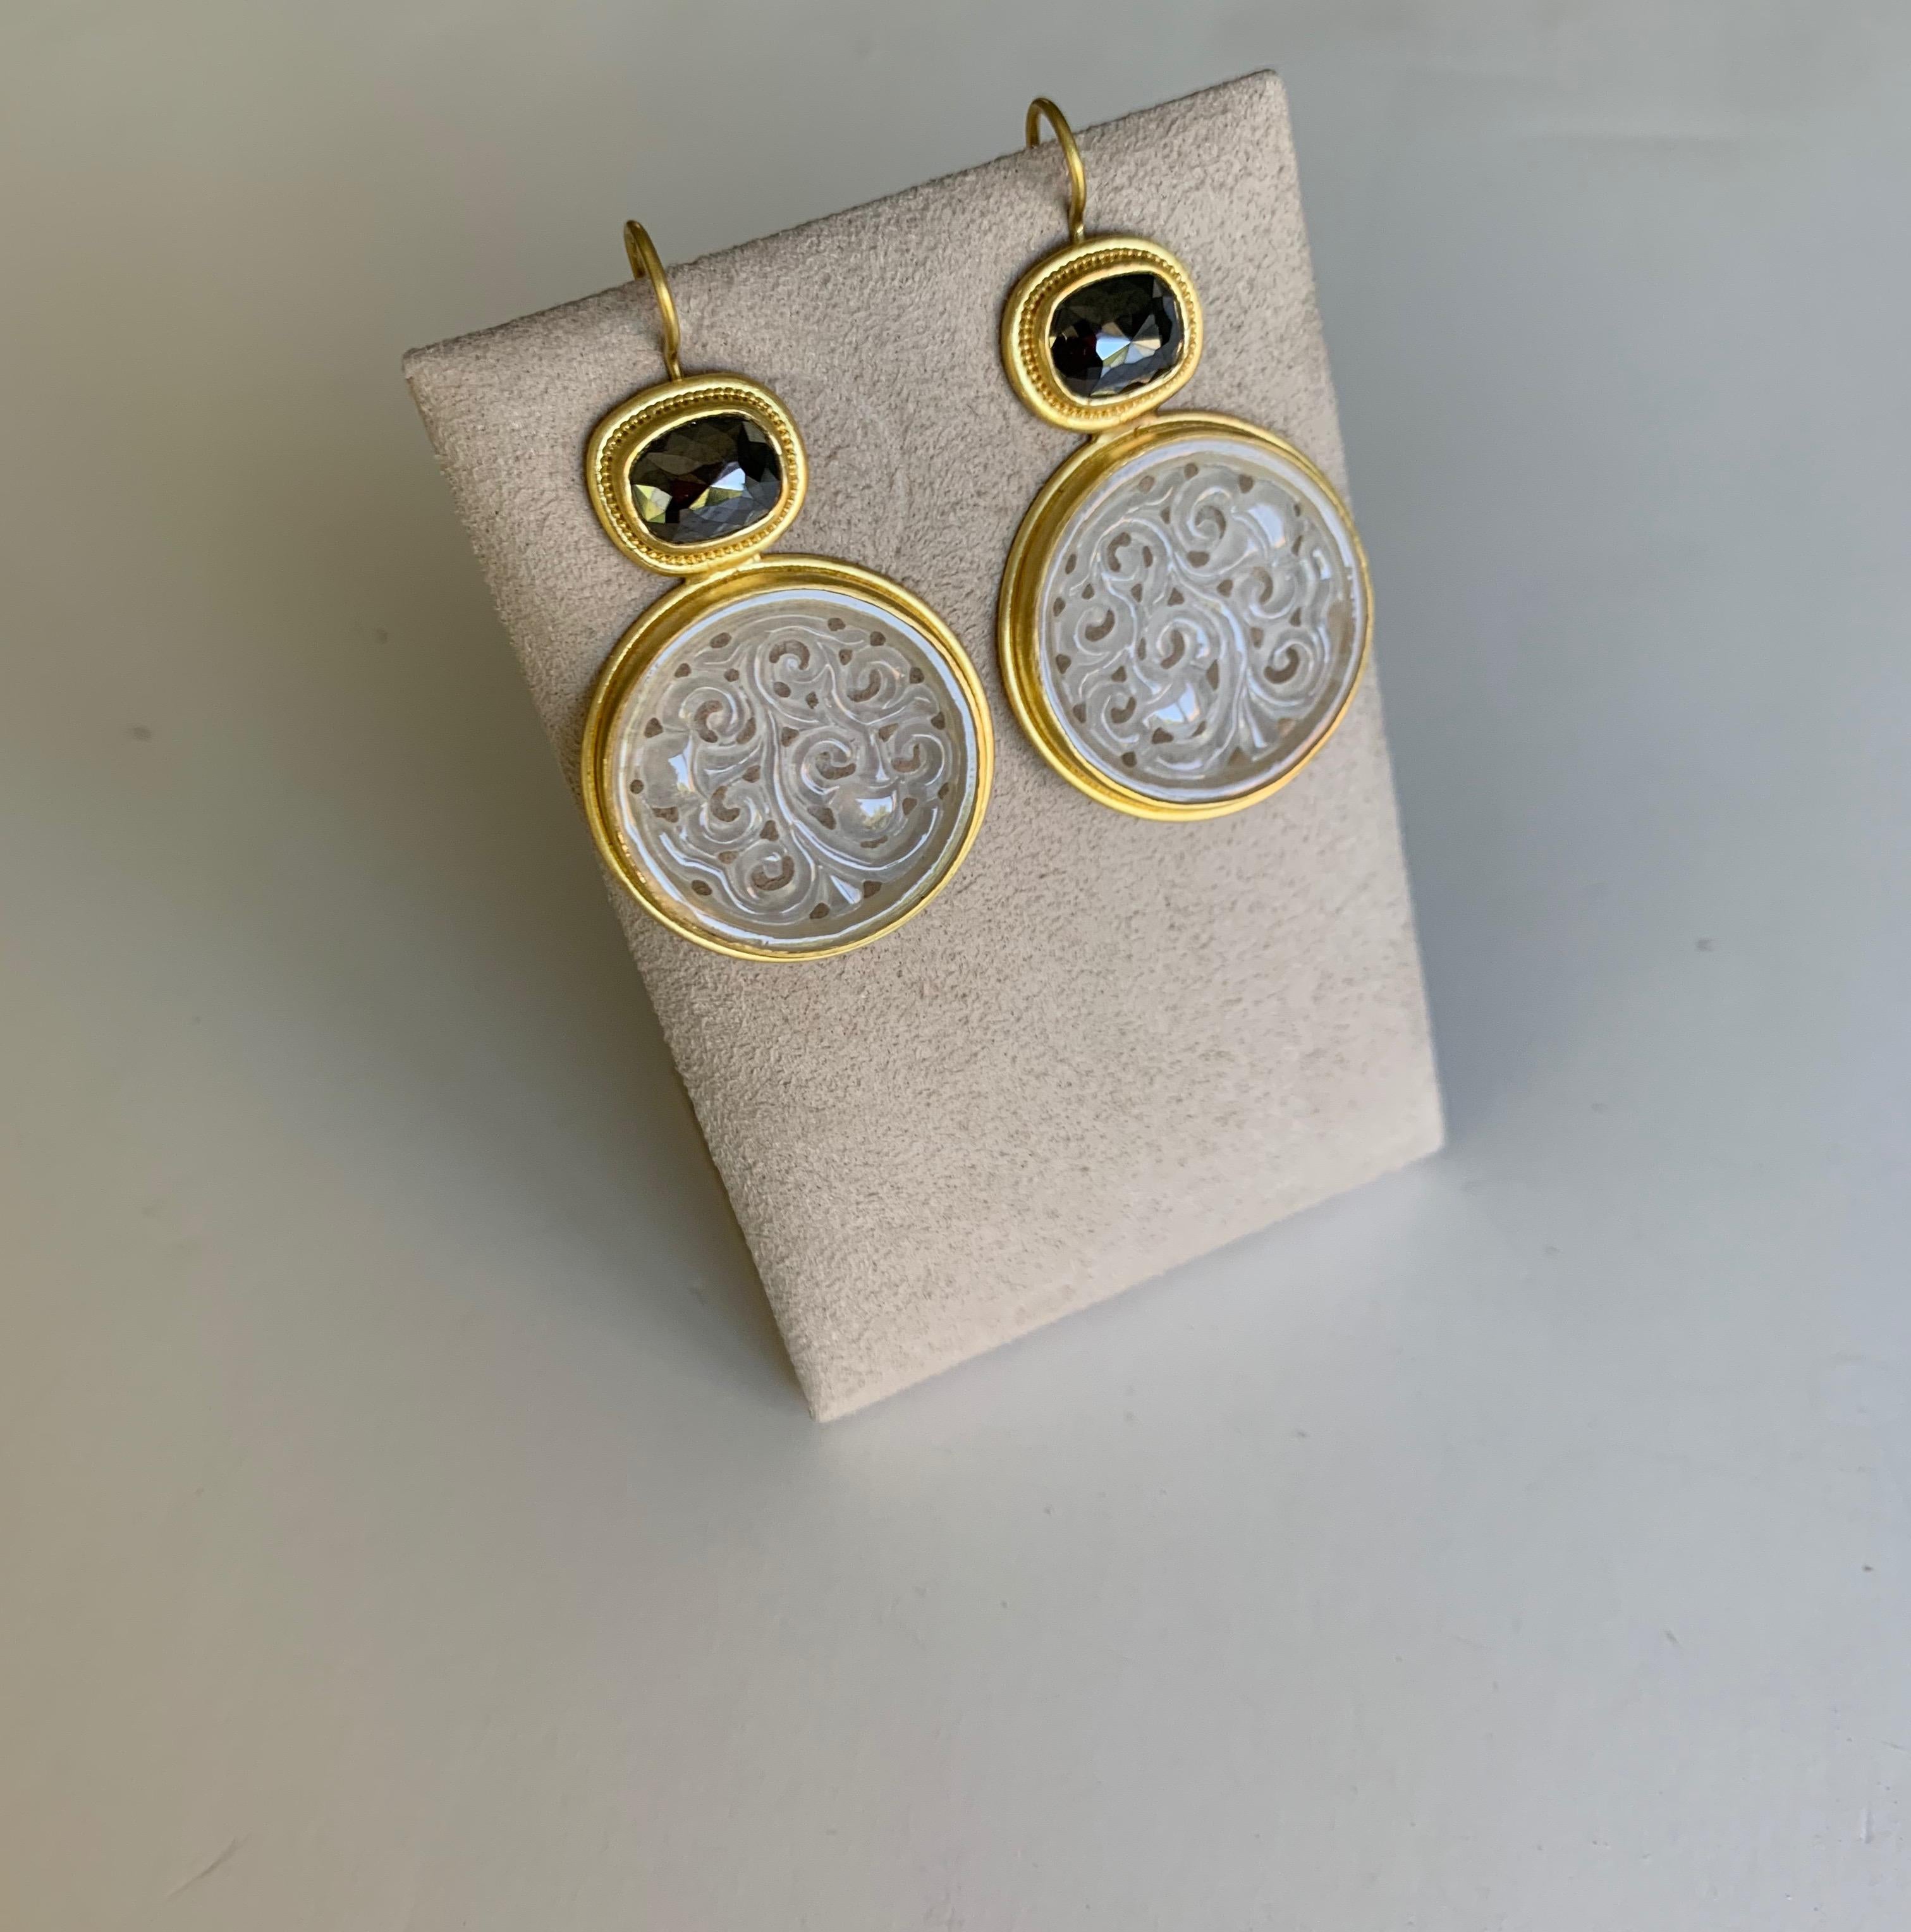 Stunning earrings in delicately carved Icy Jadeite and rose cut black Diamonds, set in 22 Karat gold and enhanced with fine granulation.
The rose cut diamonds are 7 x 9 millimeters and weigh 4.91 carats
The Jadeites are 24mm diameter by 2.5mm